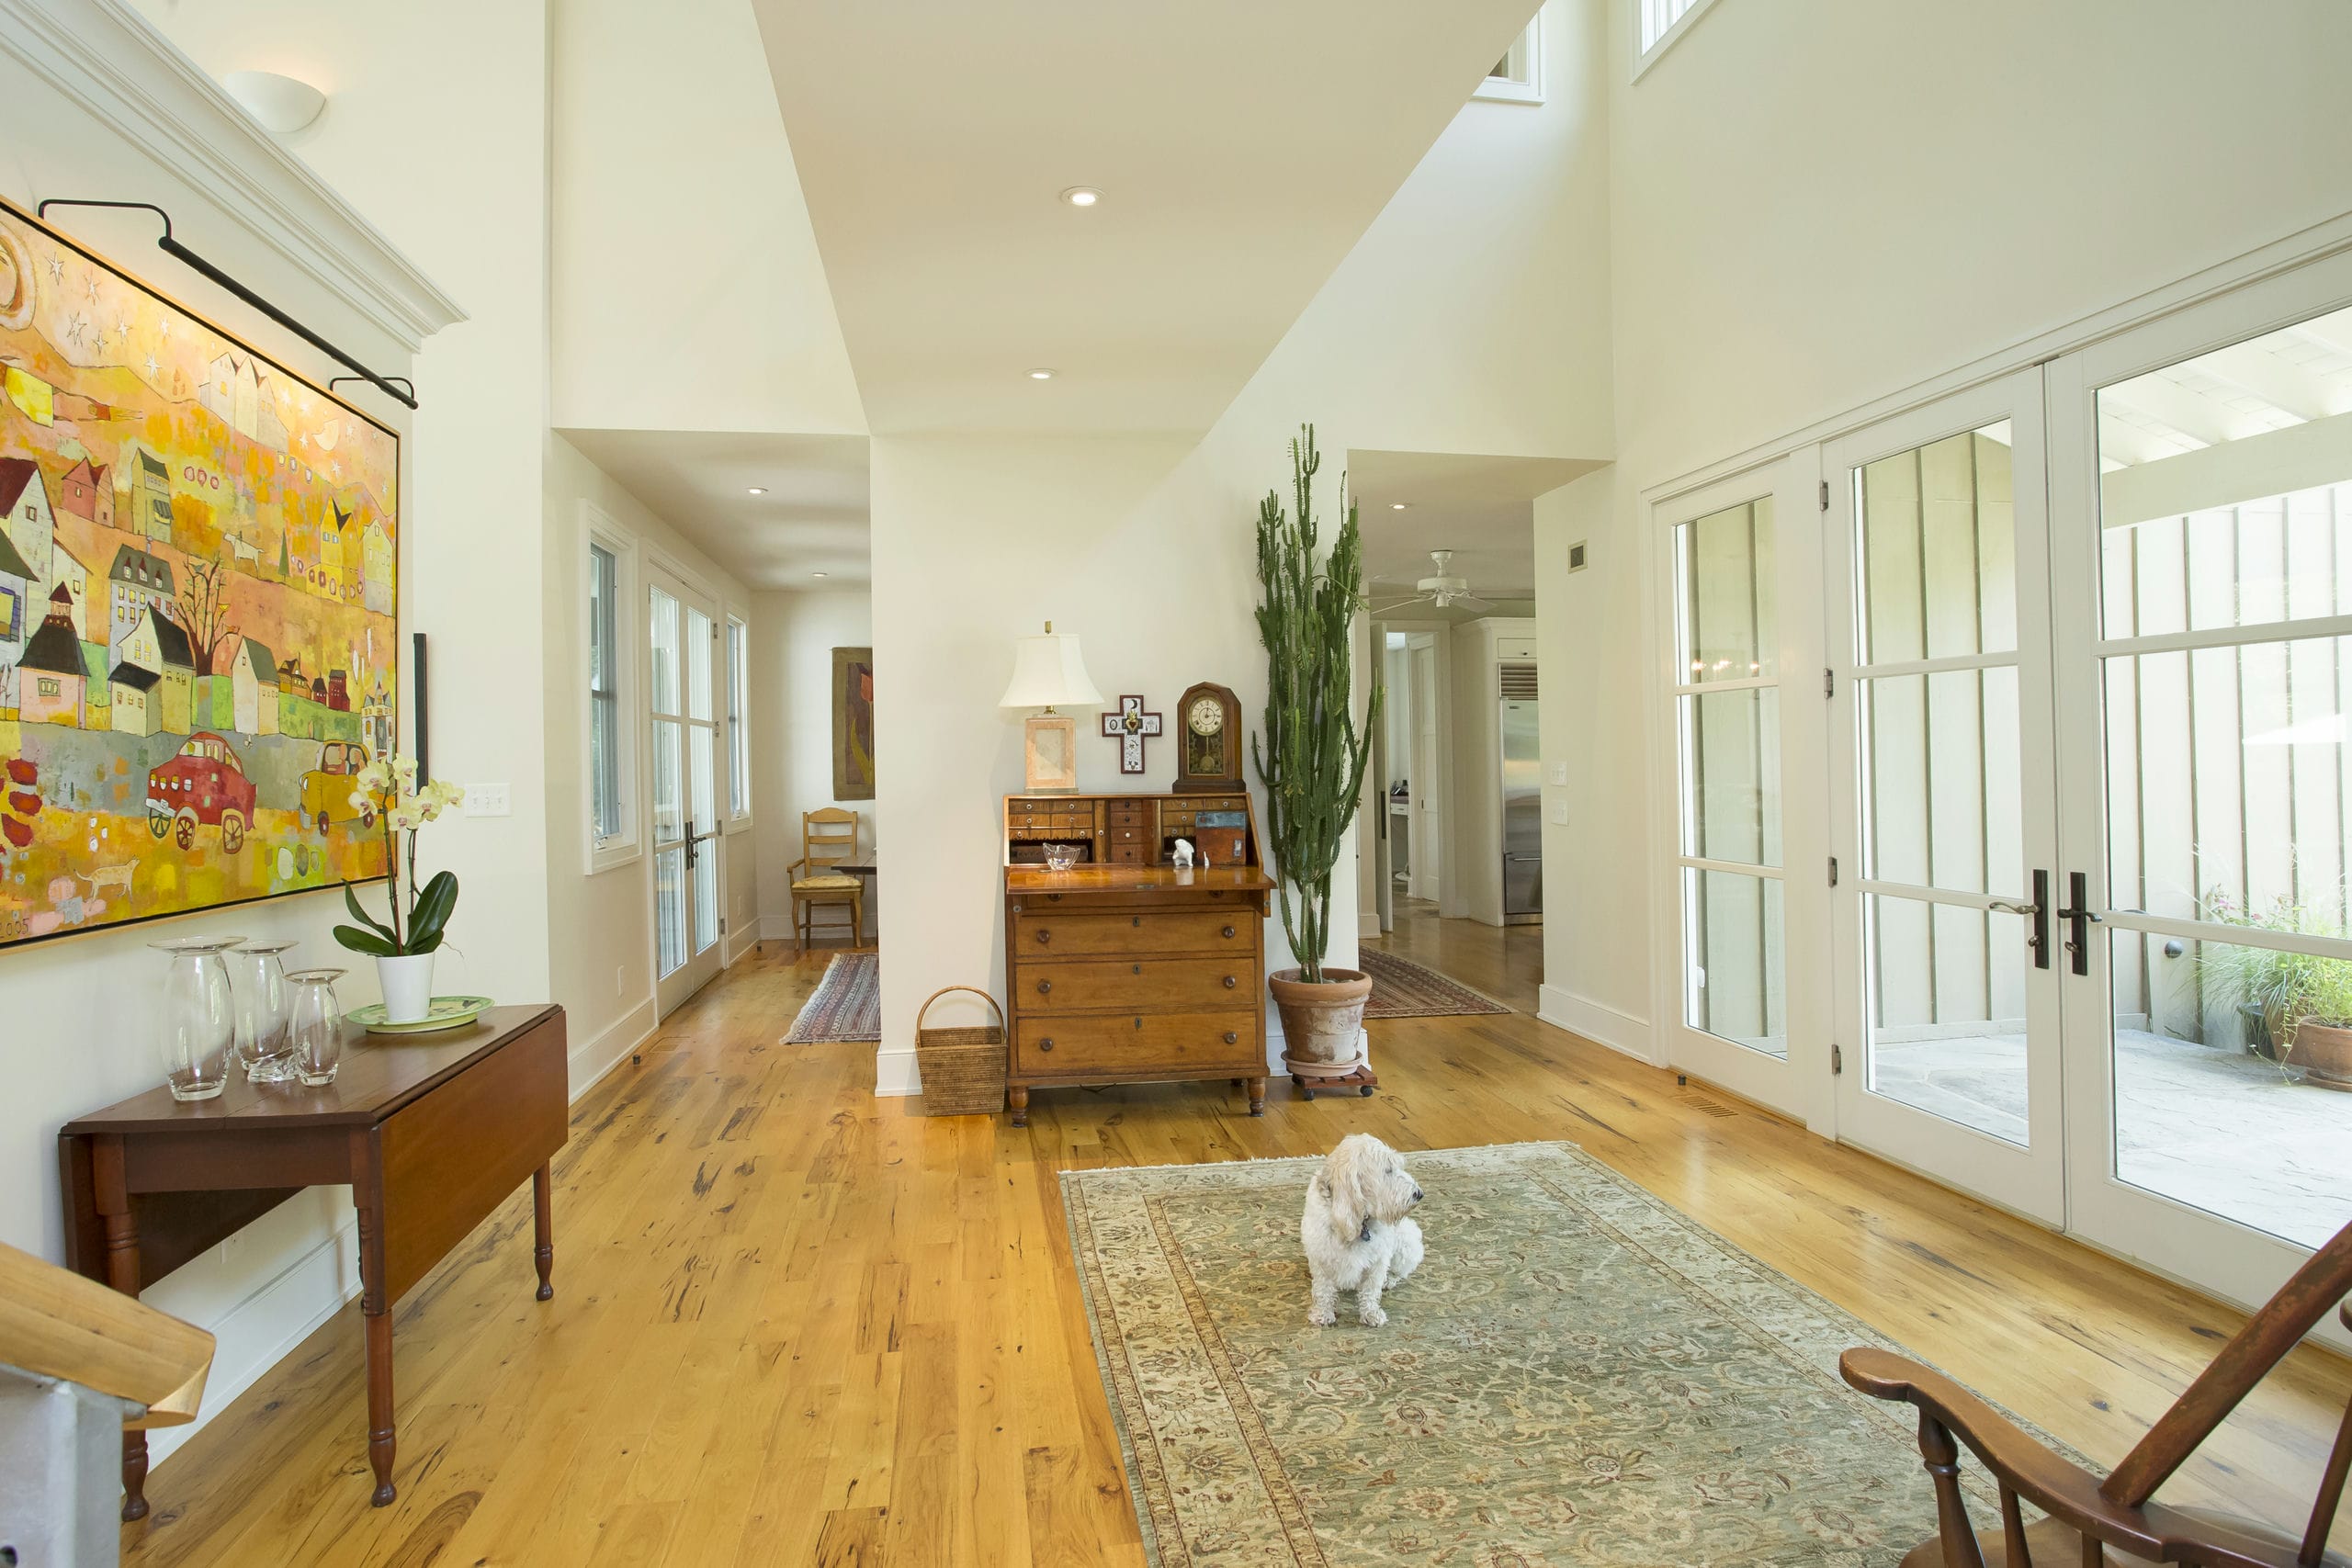 Bright and airy foyer with rustic wood floors and double height ceiling